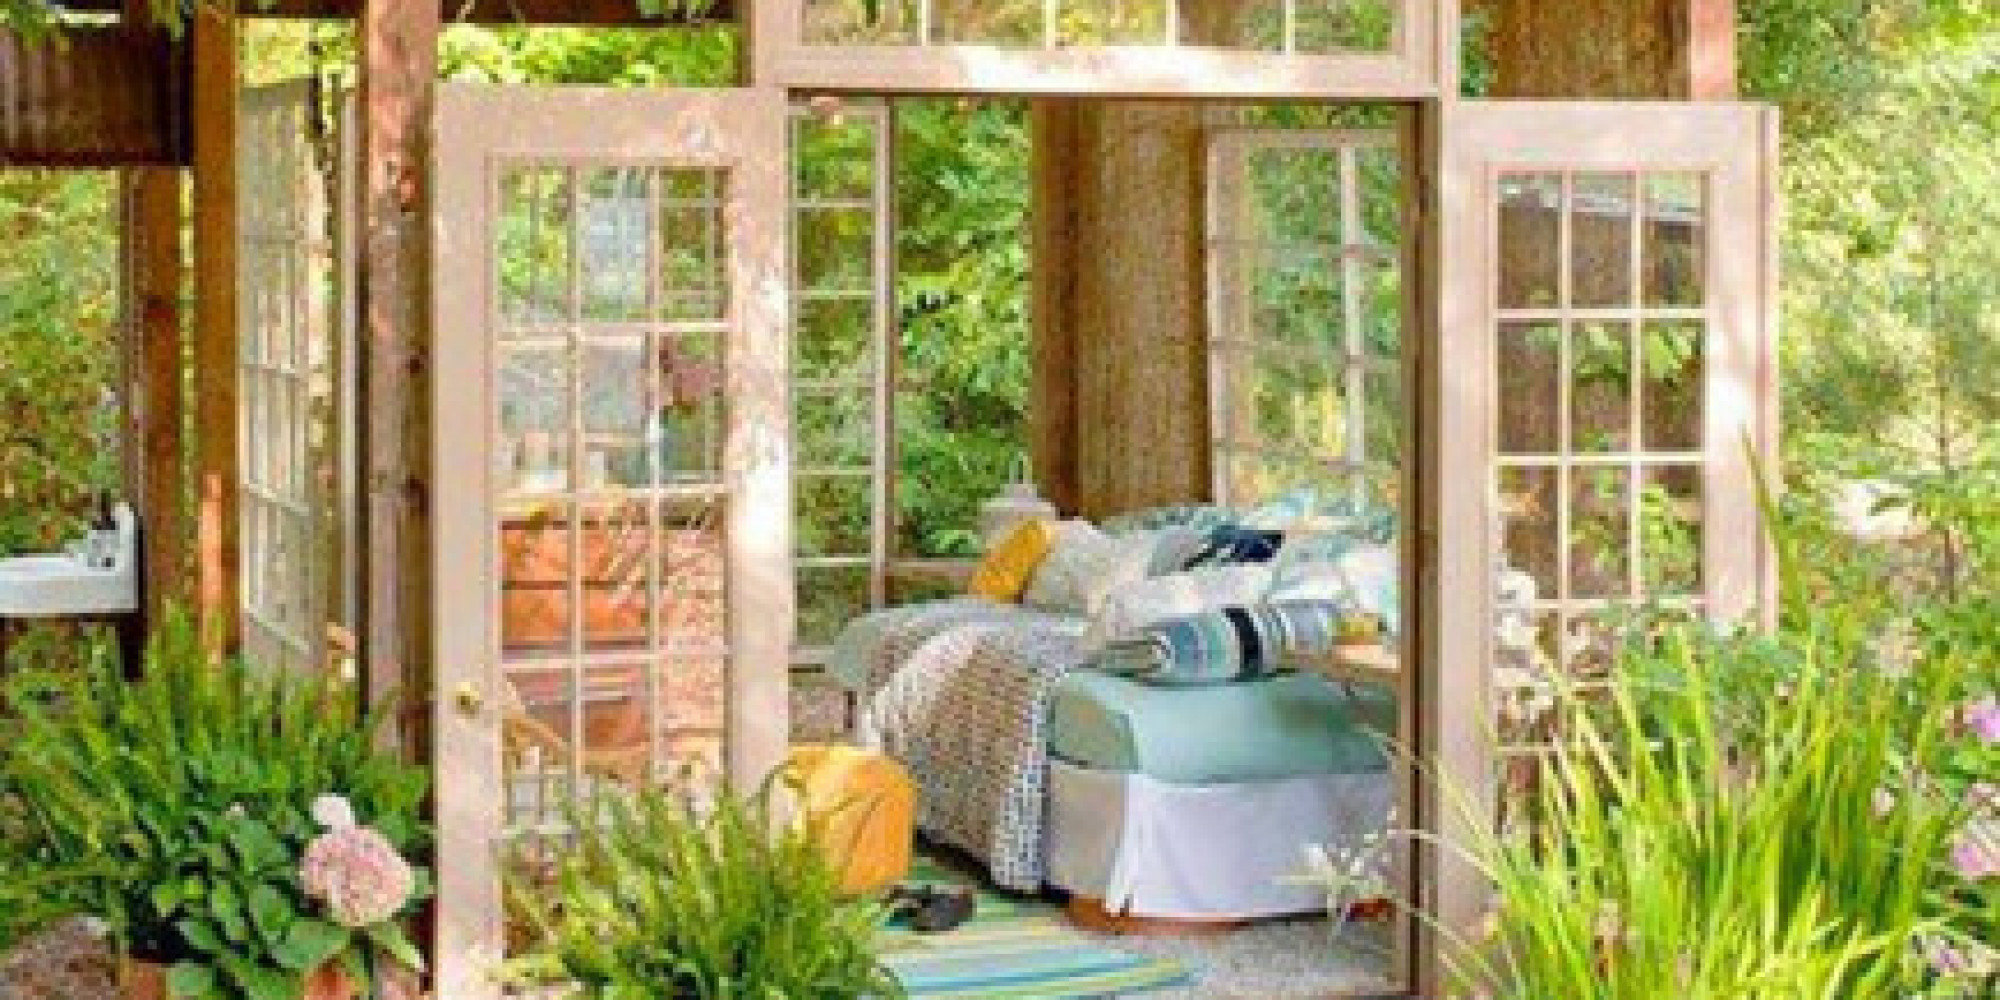 'She Sheds' Are The New Man Caves HuffPost